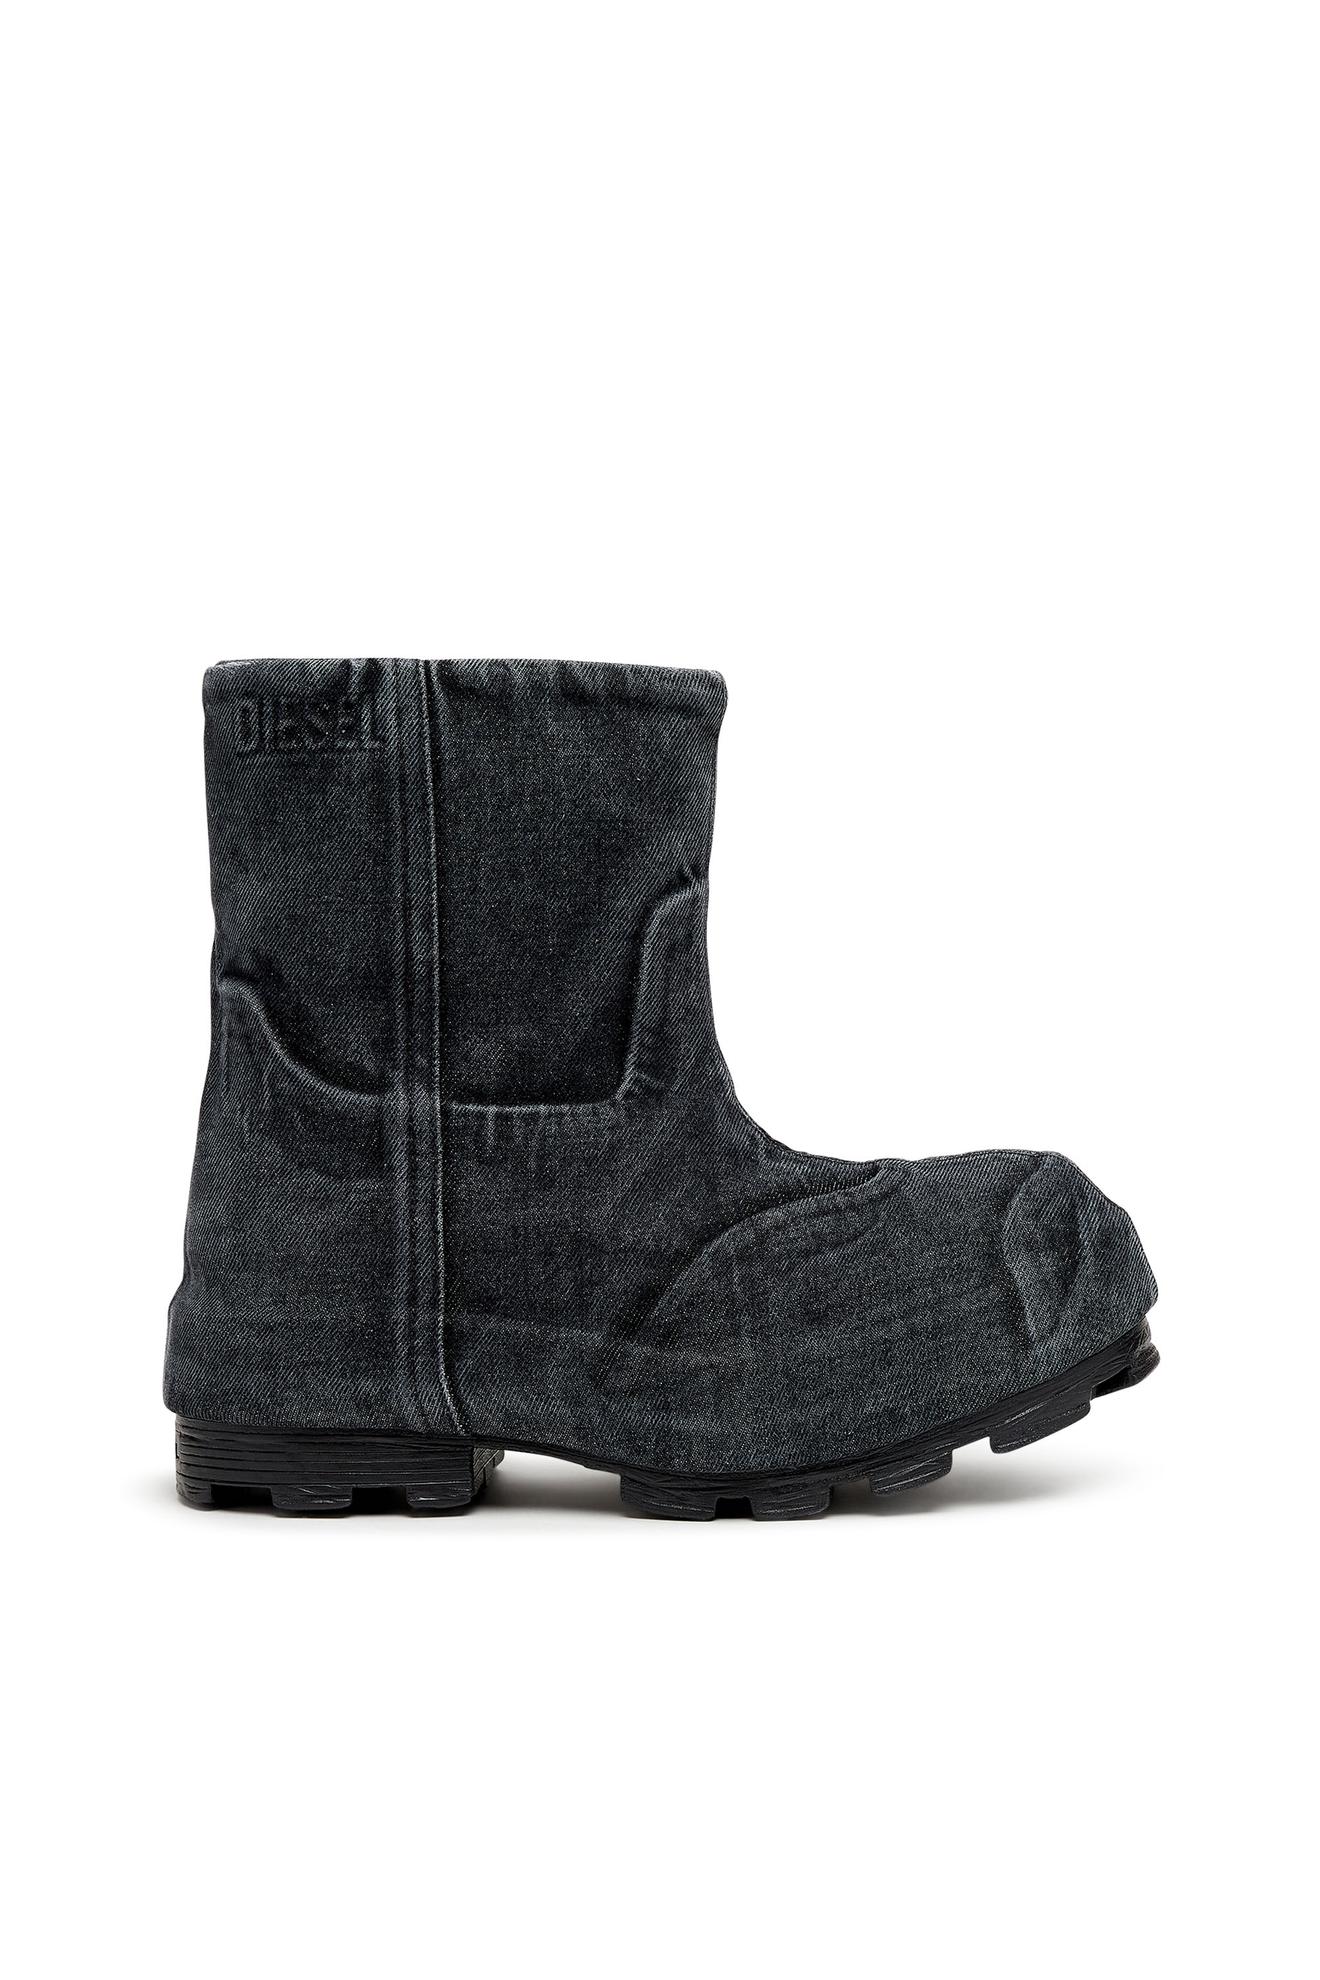 D-Hammer Ch Md Boots - Chelsea boots in washed denim za 689 zł w Diesel